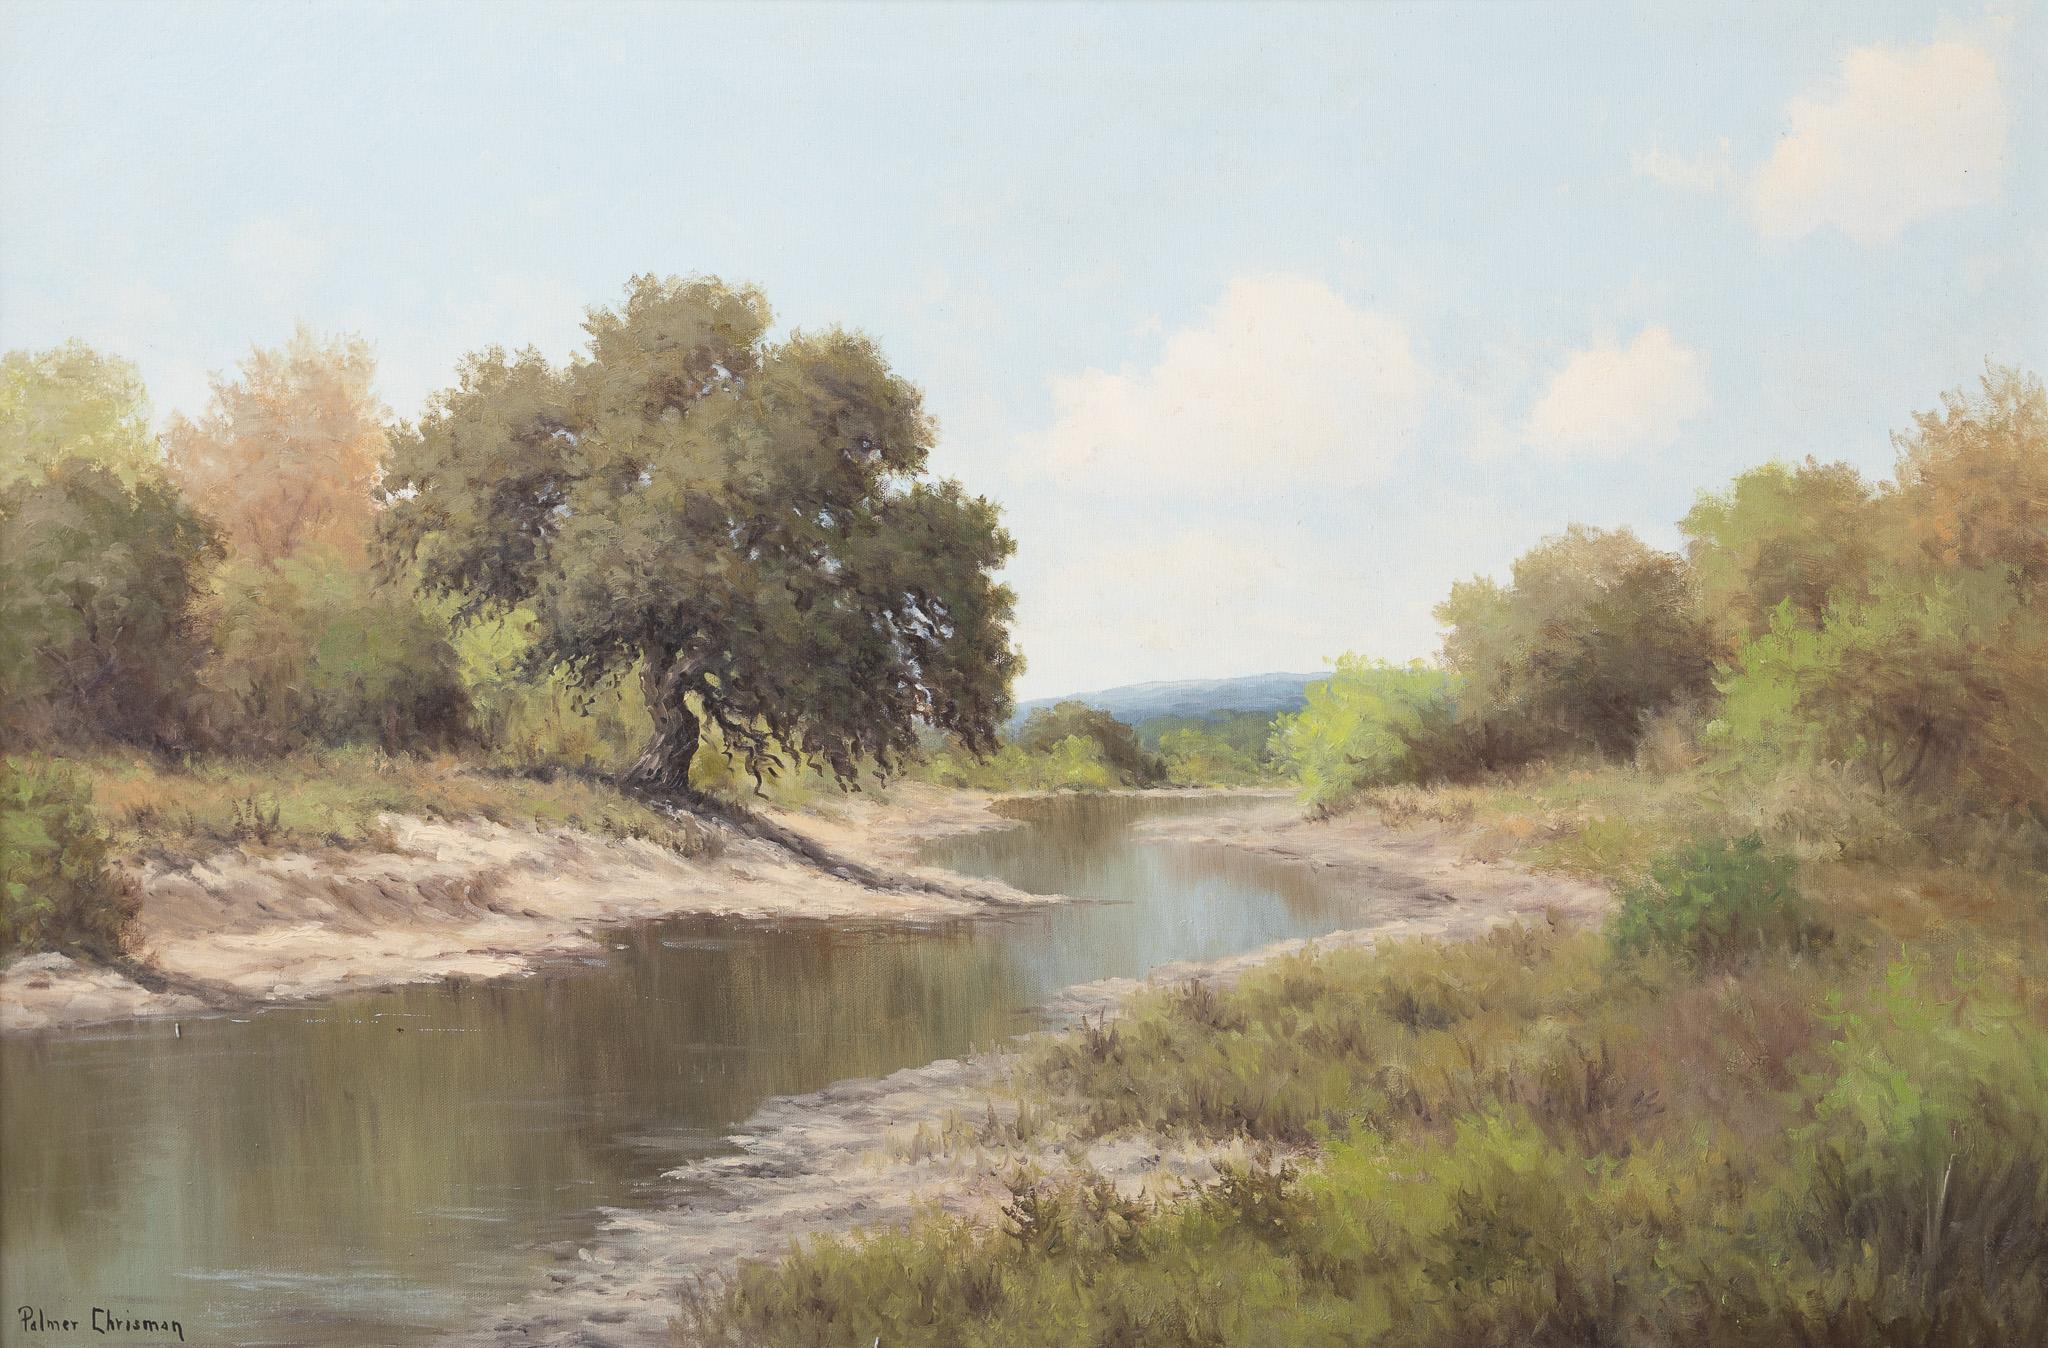 Palmer Chrisman Landscape Painting - "Hill Country Landscape with a Creek" Texas Landscape in Summer